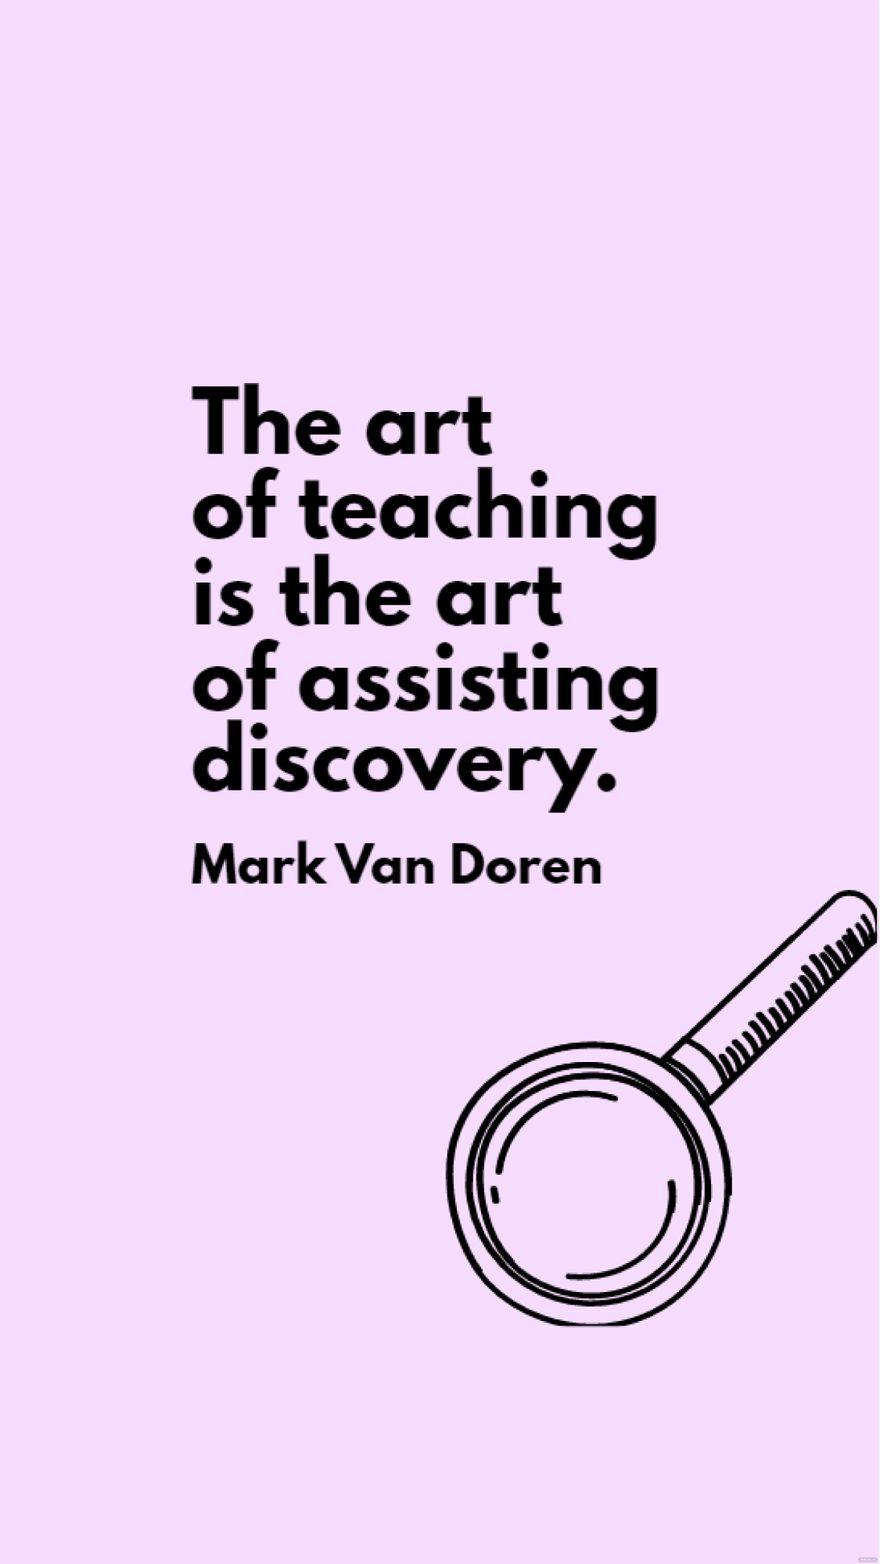 Mark Van Doren - The art of teaching is the art of assisting discovery.